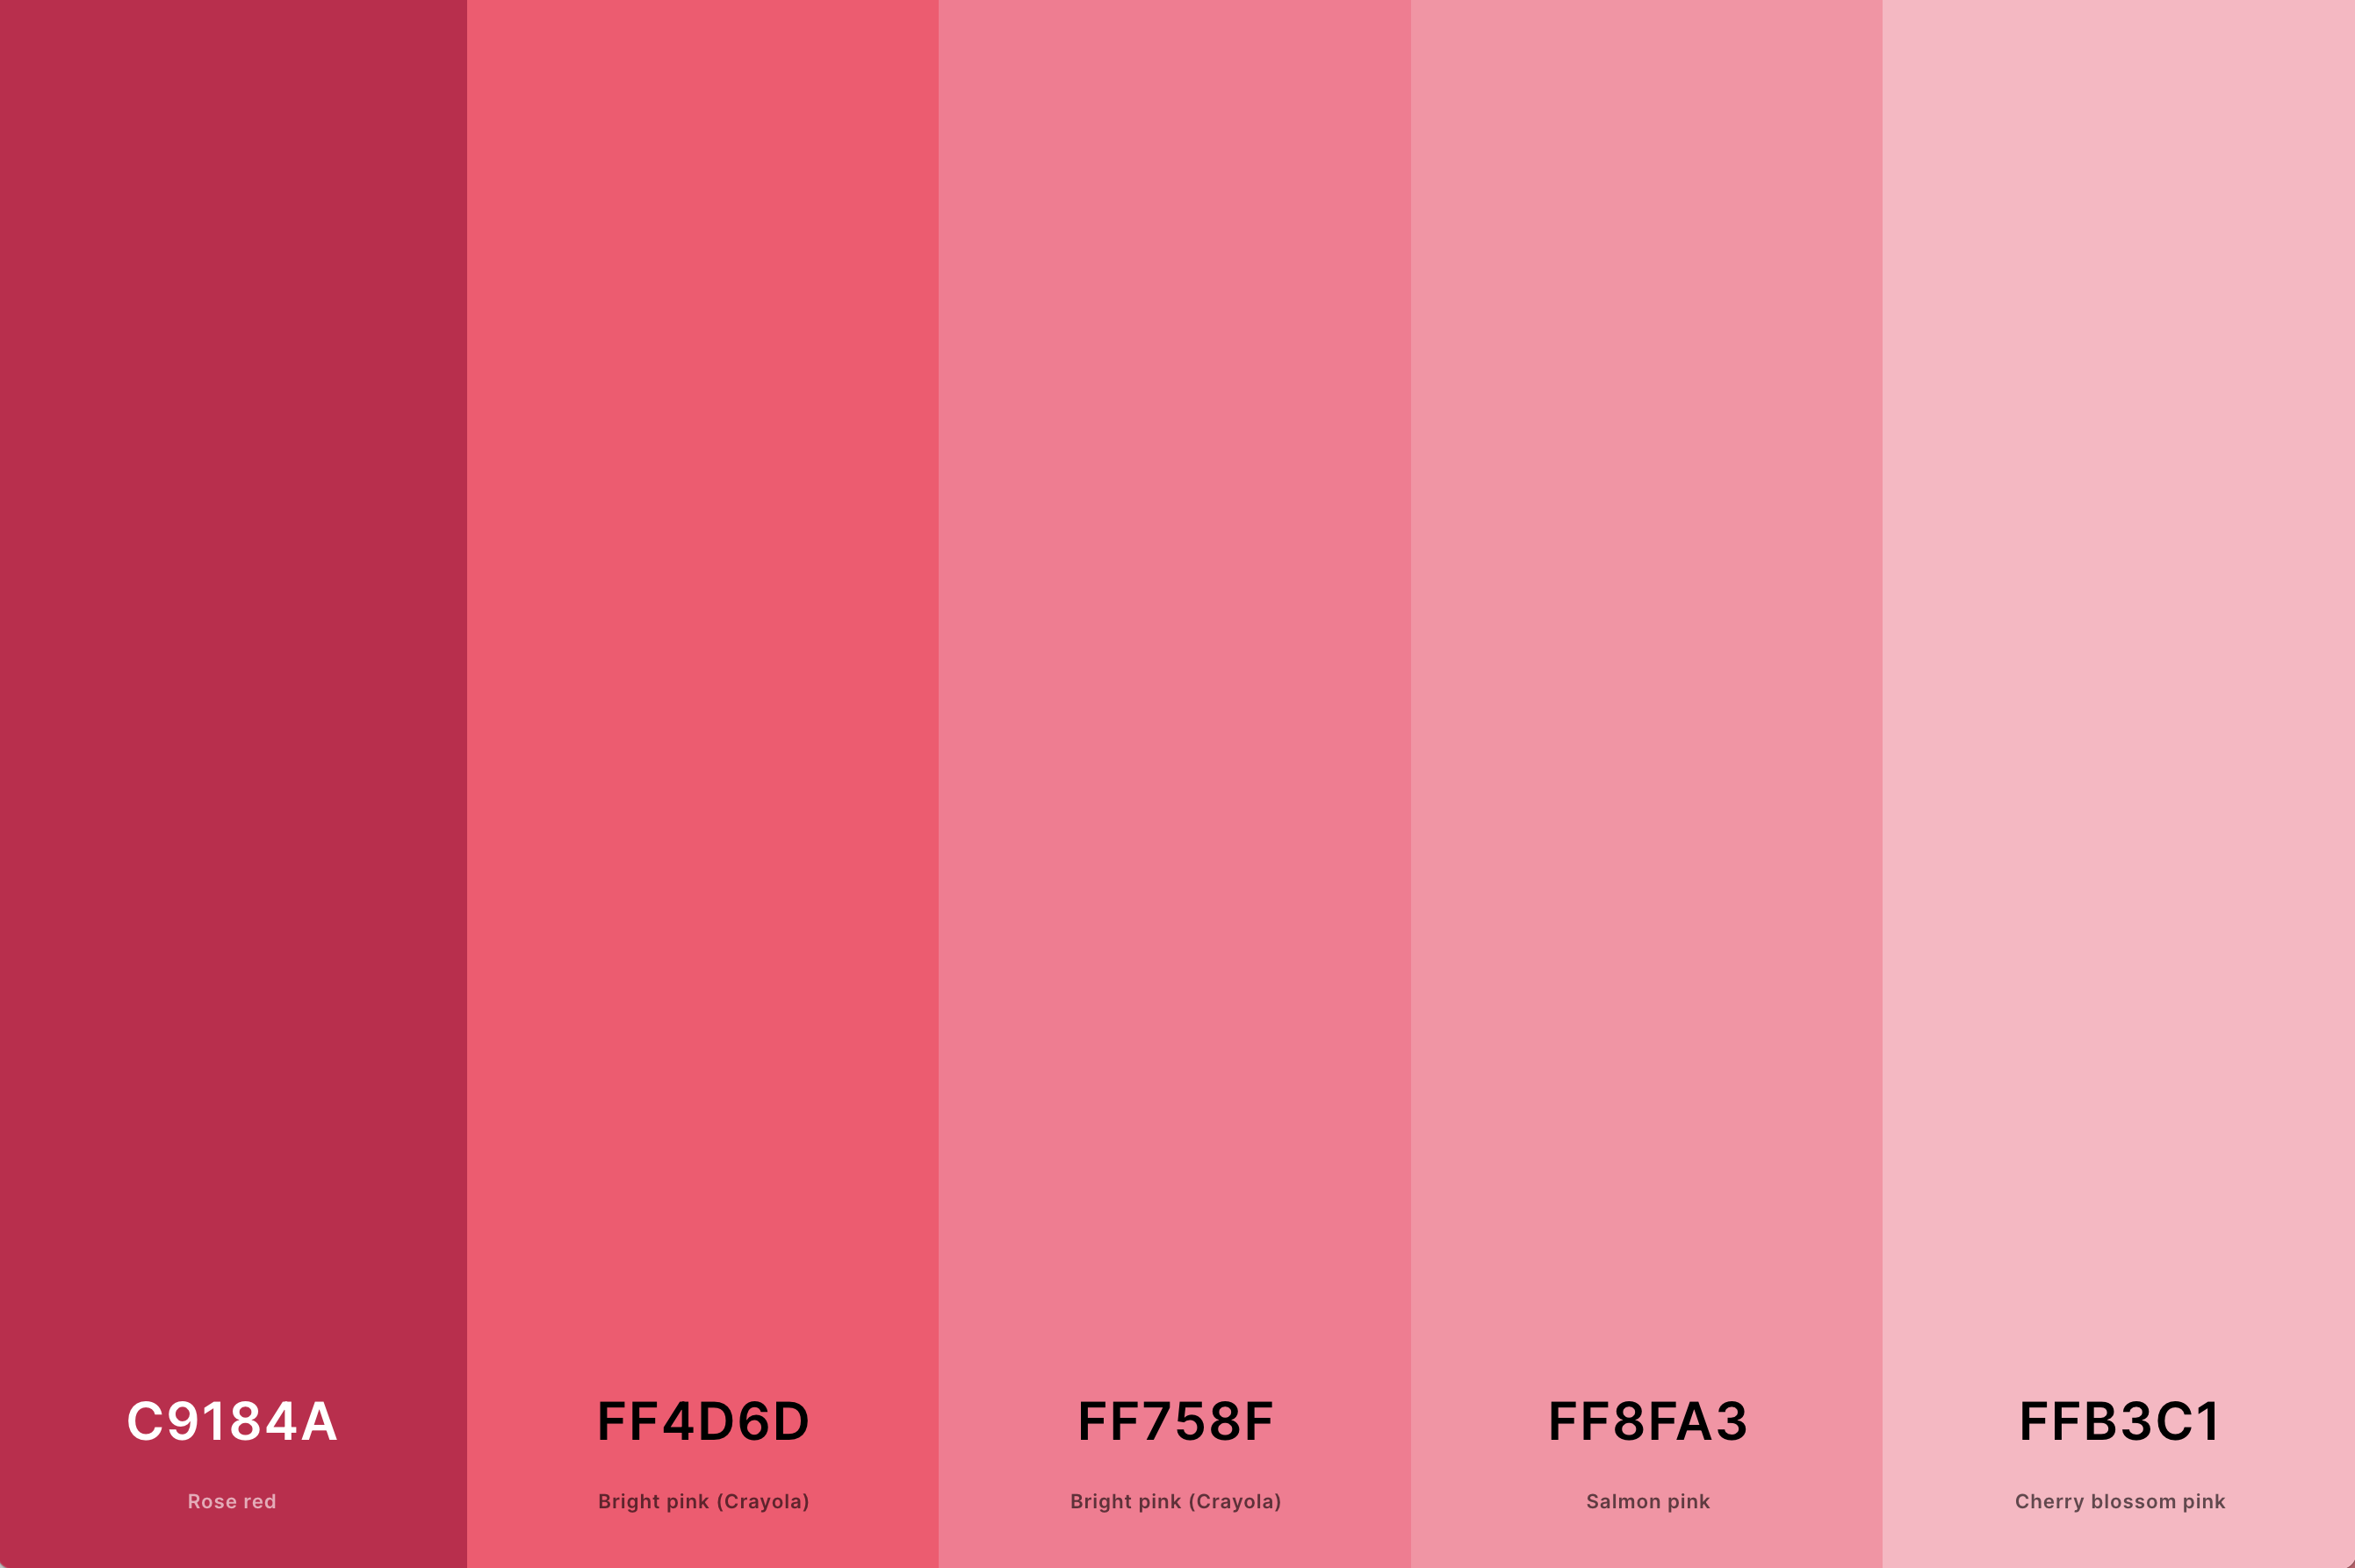 https://cdn.shopify.com/s/files/1/1038/1798/files/11._Pink_And_Red_Color_Palette_Color_Palette_with_Rose_Red_Hex_C9184A_Bright_Pink_Crayola_Hex_FF4D6D_Bright_Pink_Crayola_Hex_FF758F_Salmon_Pink_Hex_FF8FA3_Cherry_Blossom_Pink_Hex_FFB3.png?v=1704711946